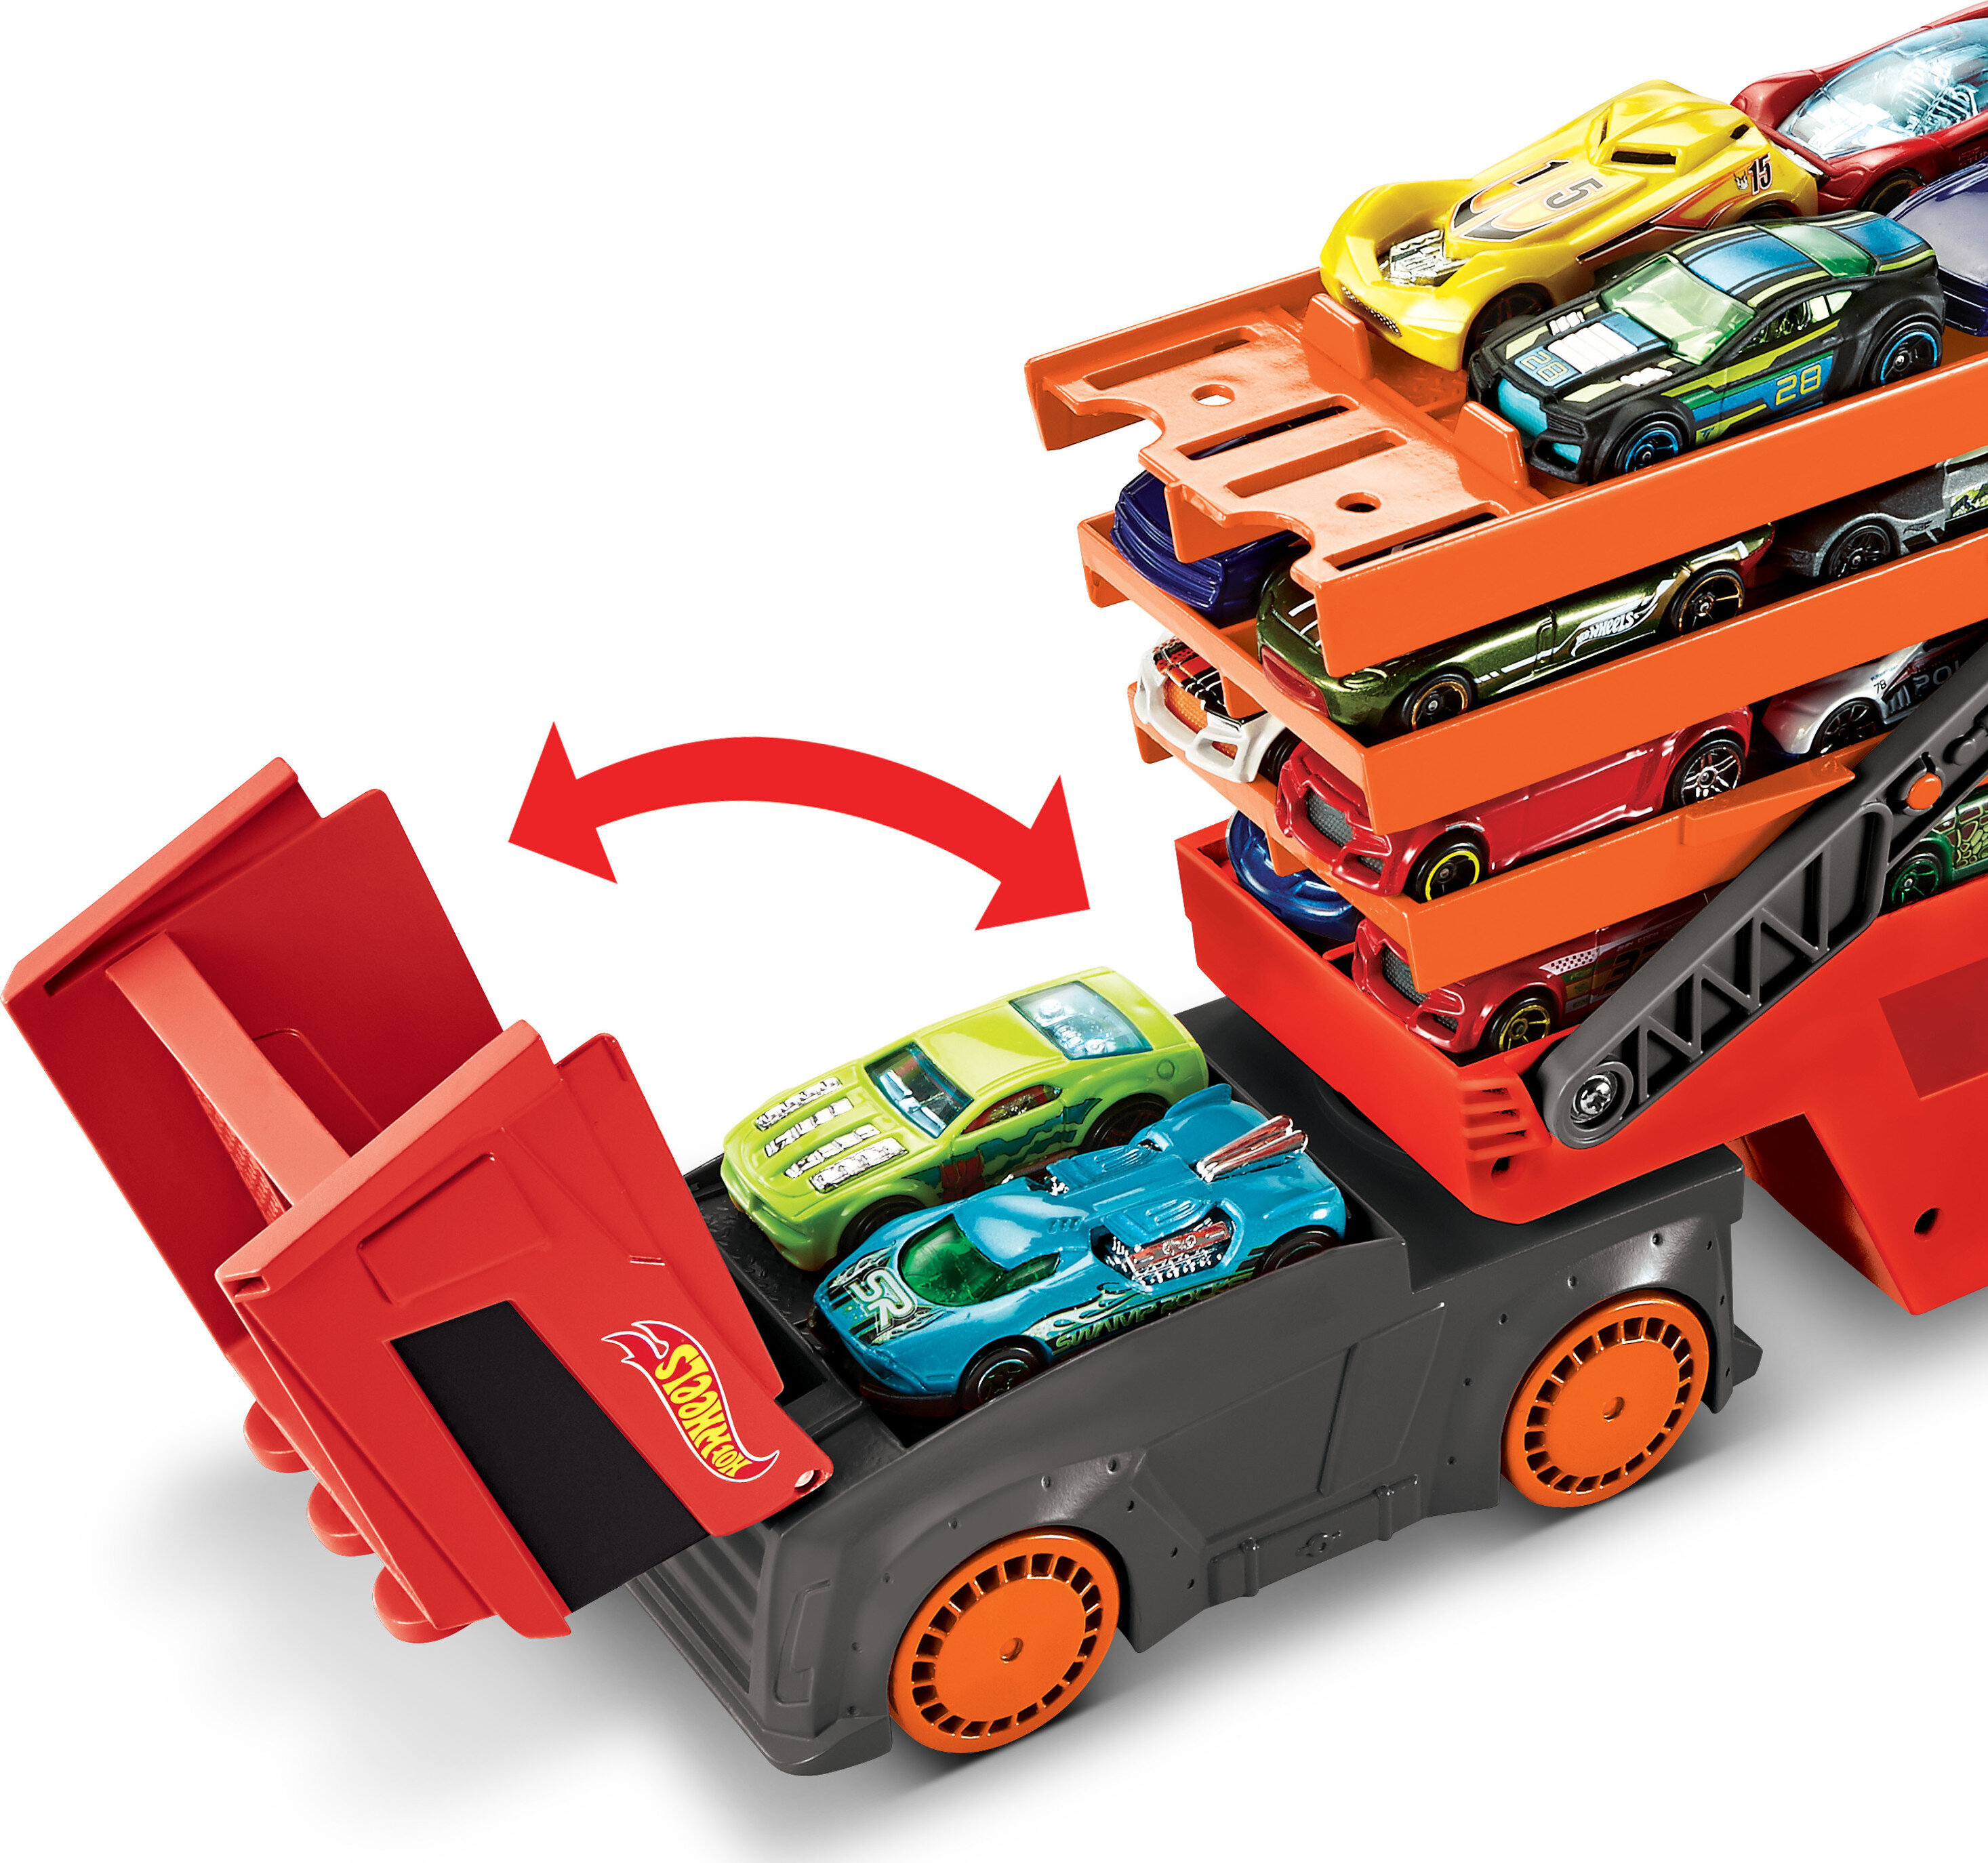 Hot Wheels Mega Hauler with 6 Expandable Levels, Stores up to 50 1:64 Scale Toy Vehicles - image 4 of 7